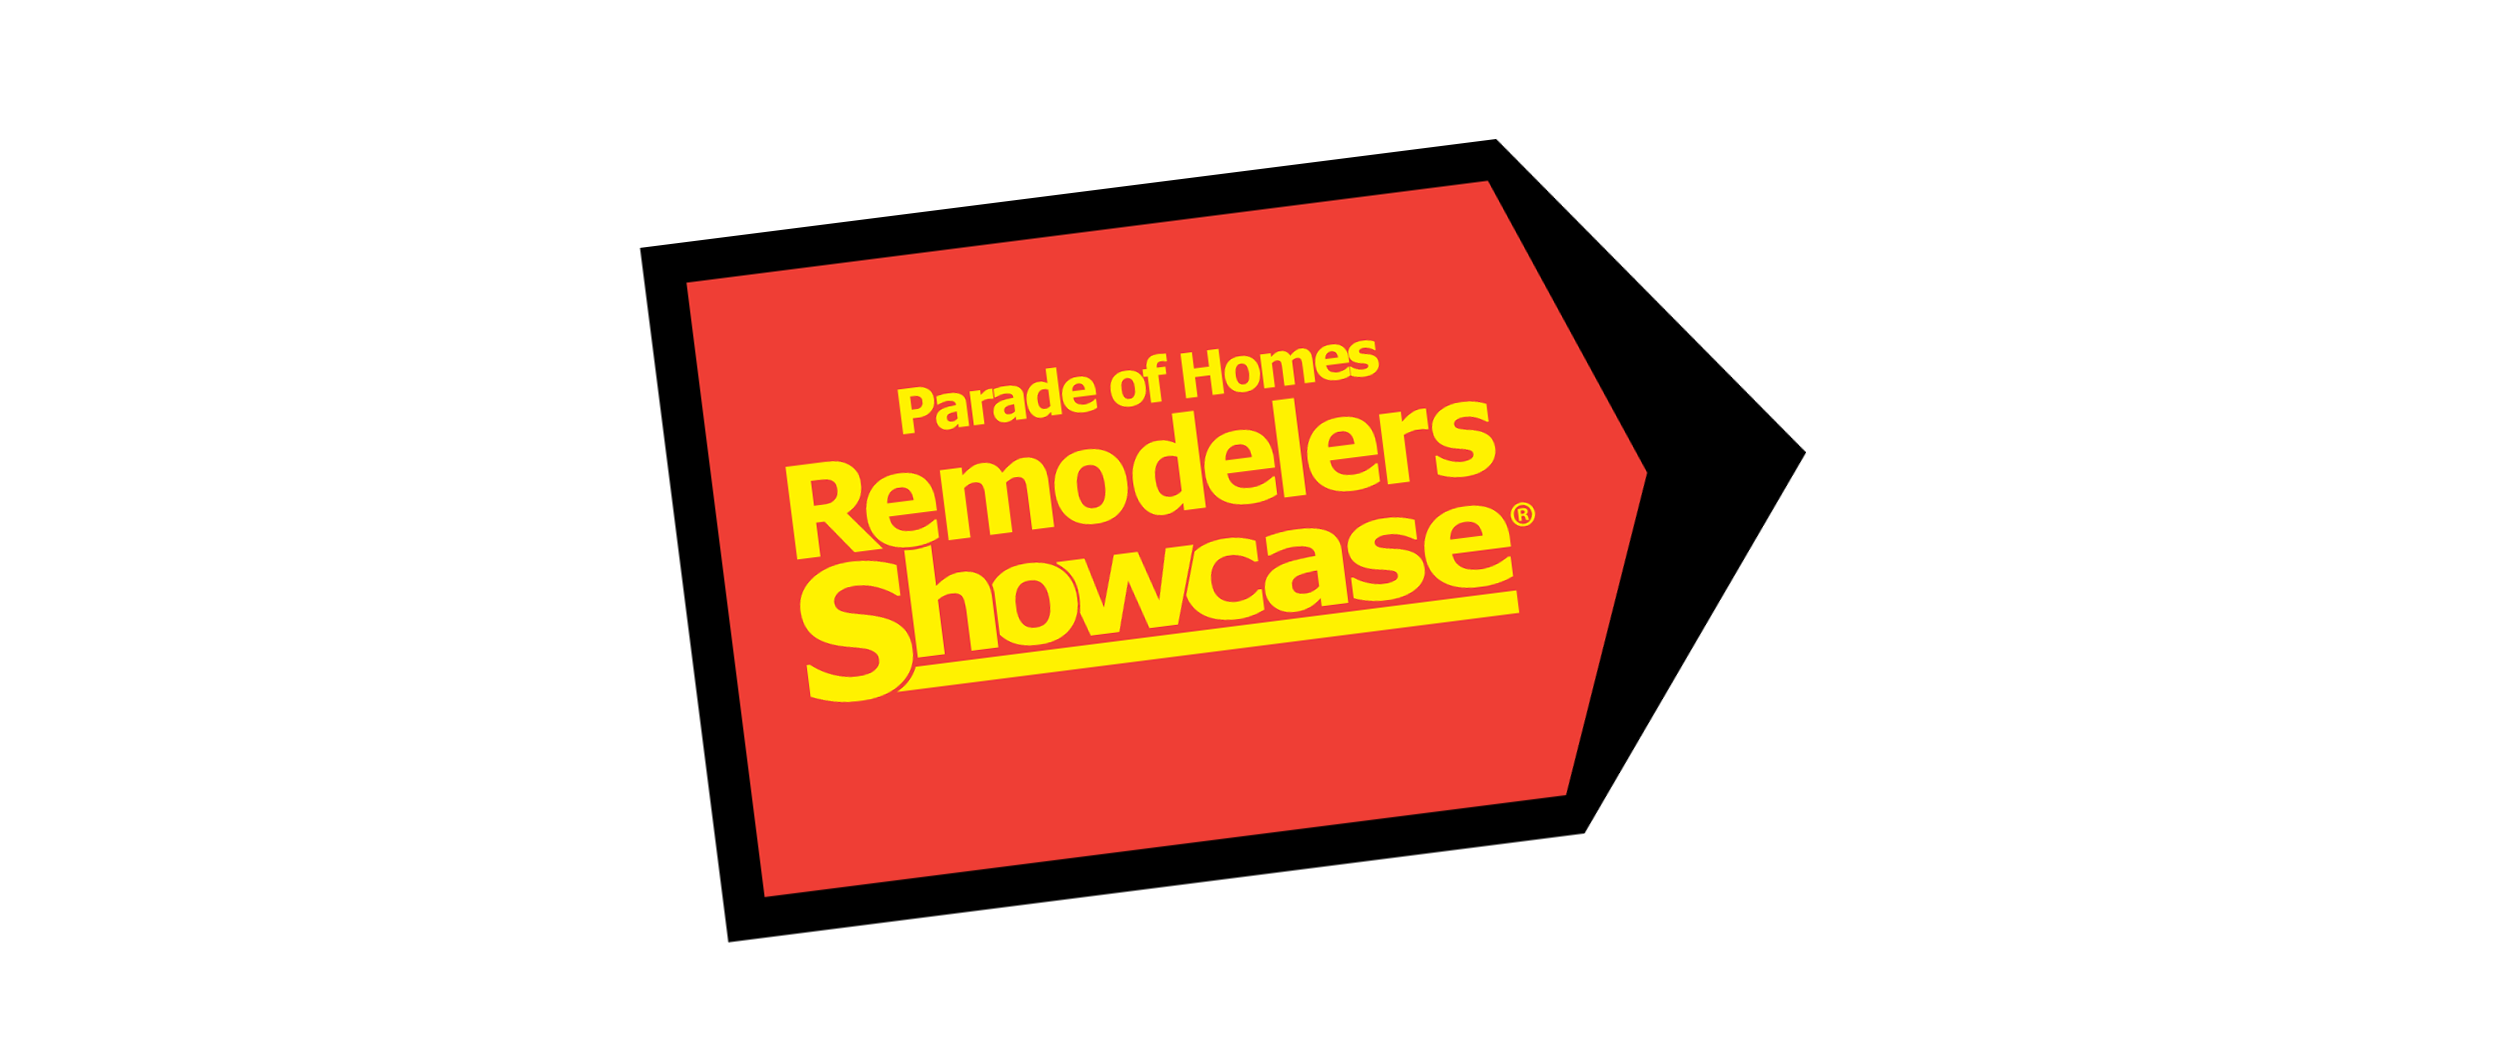 Image for Fall Remodelers Showcase Opens 34 Remodeled Homes to Tour Sept. 30-Oct. 2